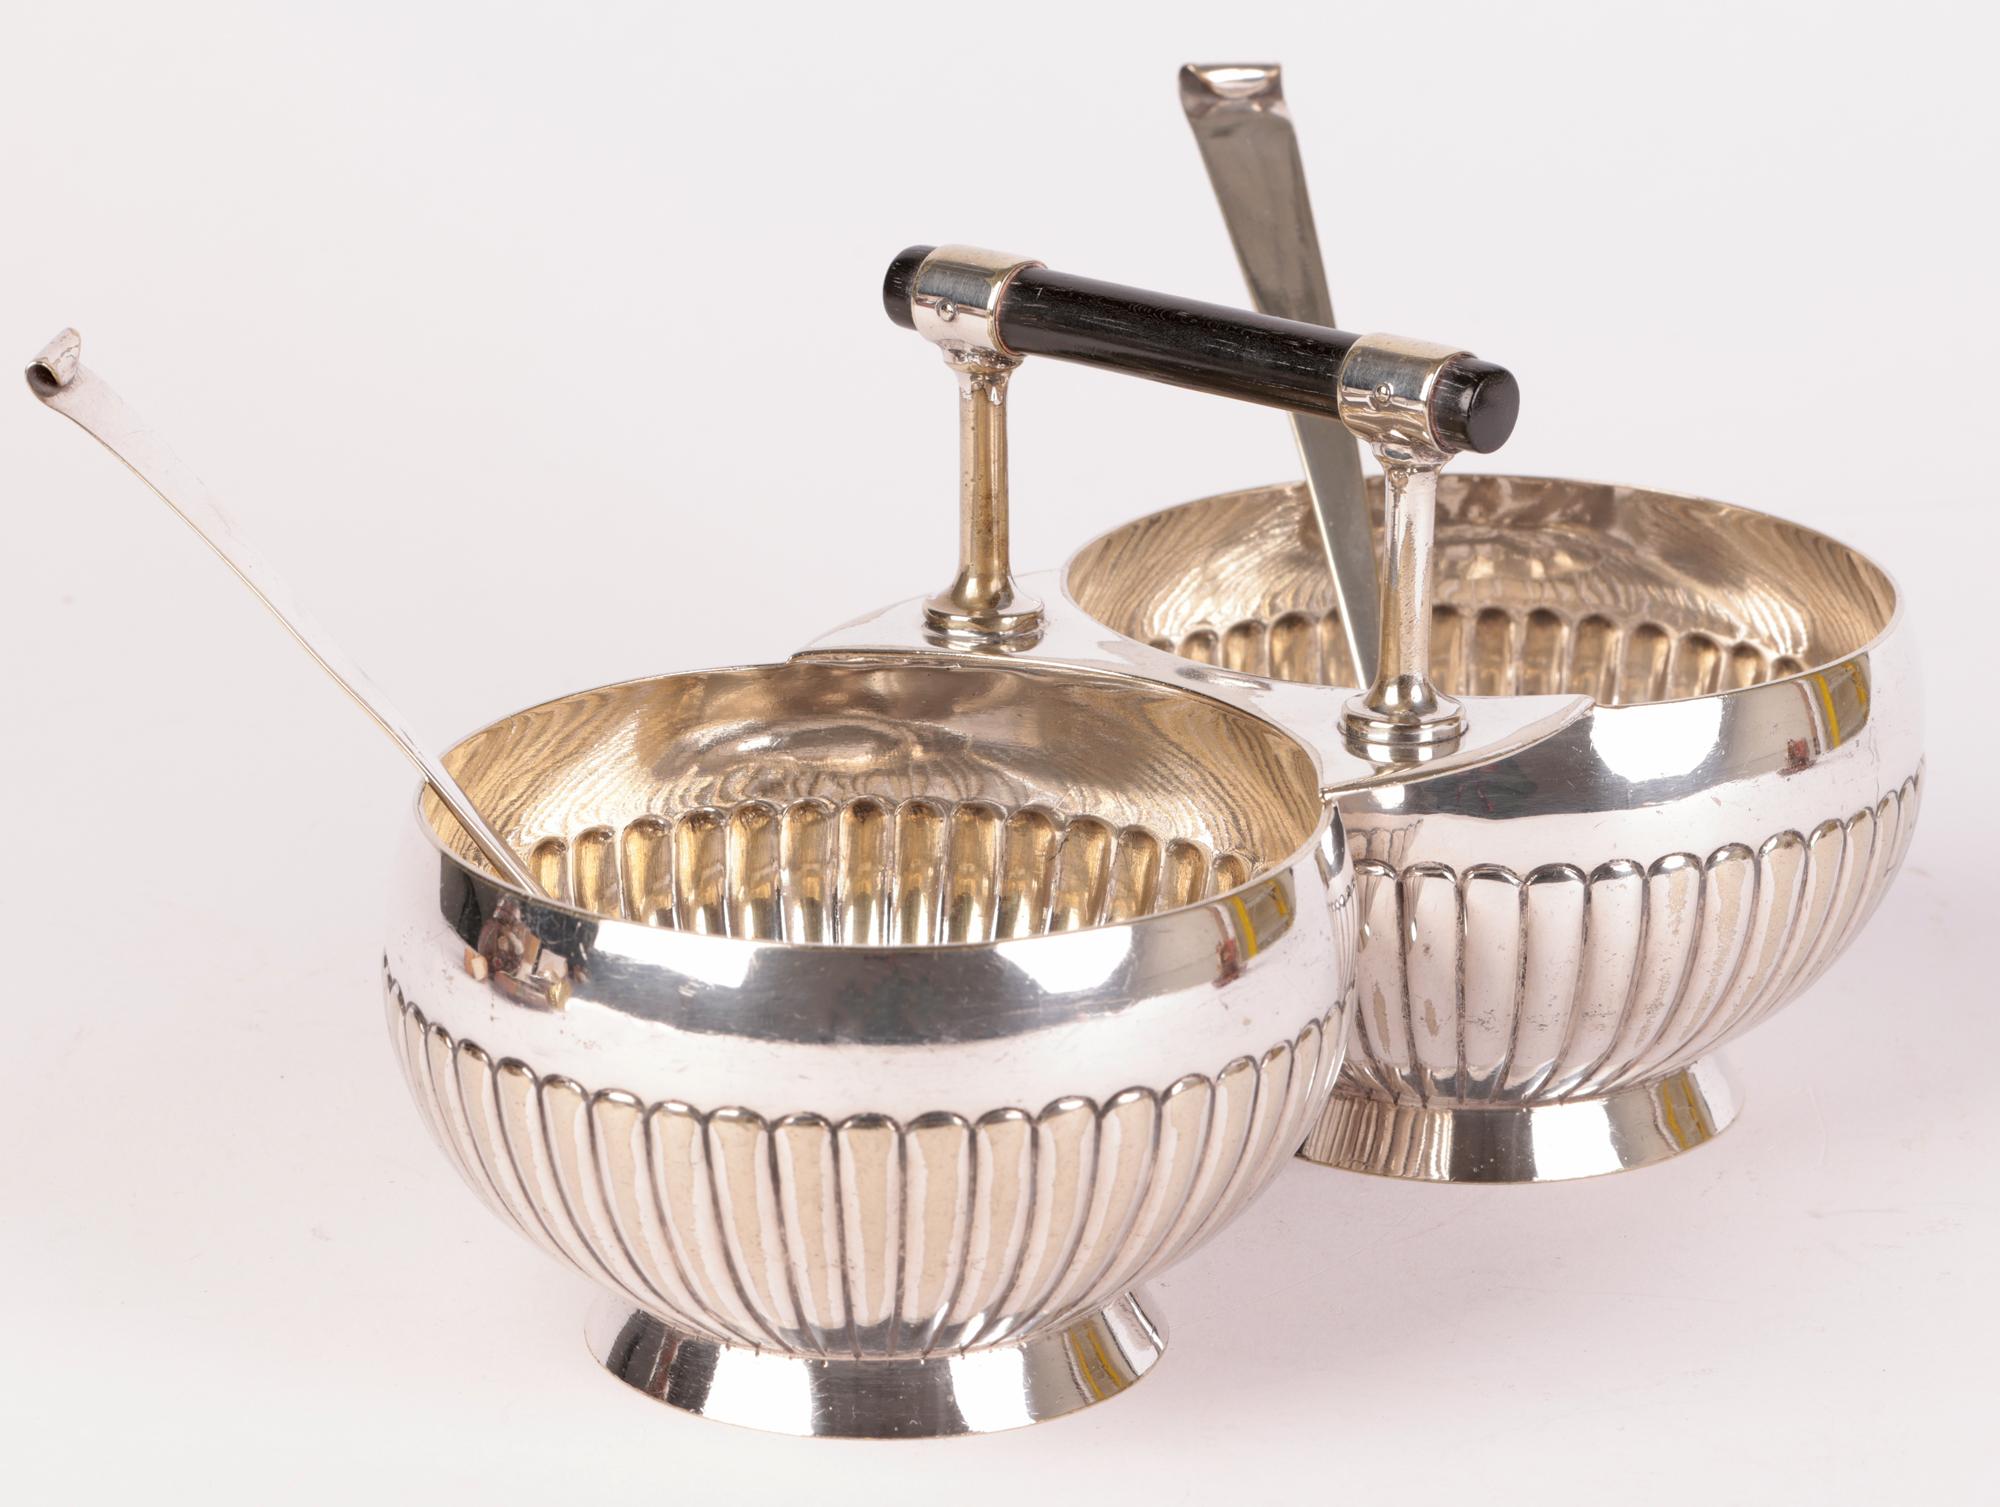 Hand-Crafted Christopher Dresser for Hukin & Heath Silver Plated Sugar Bowl with Ladles